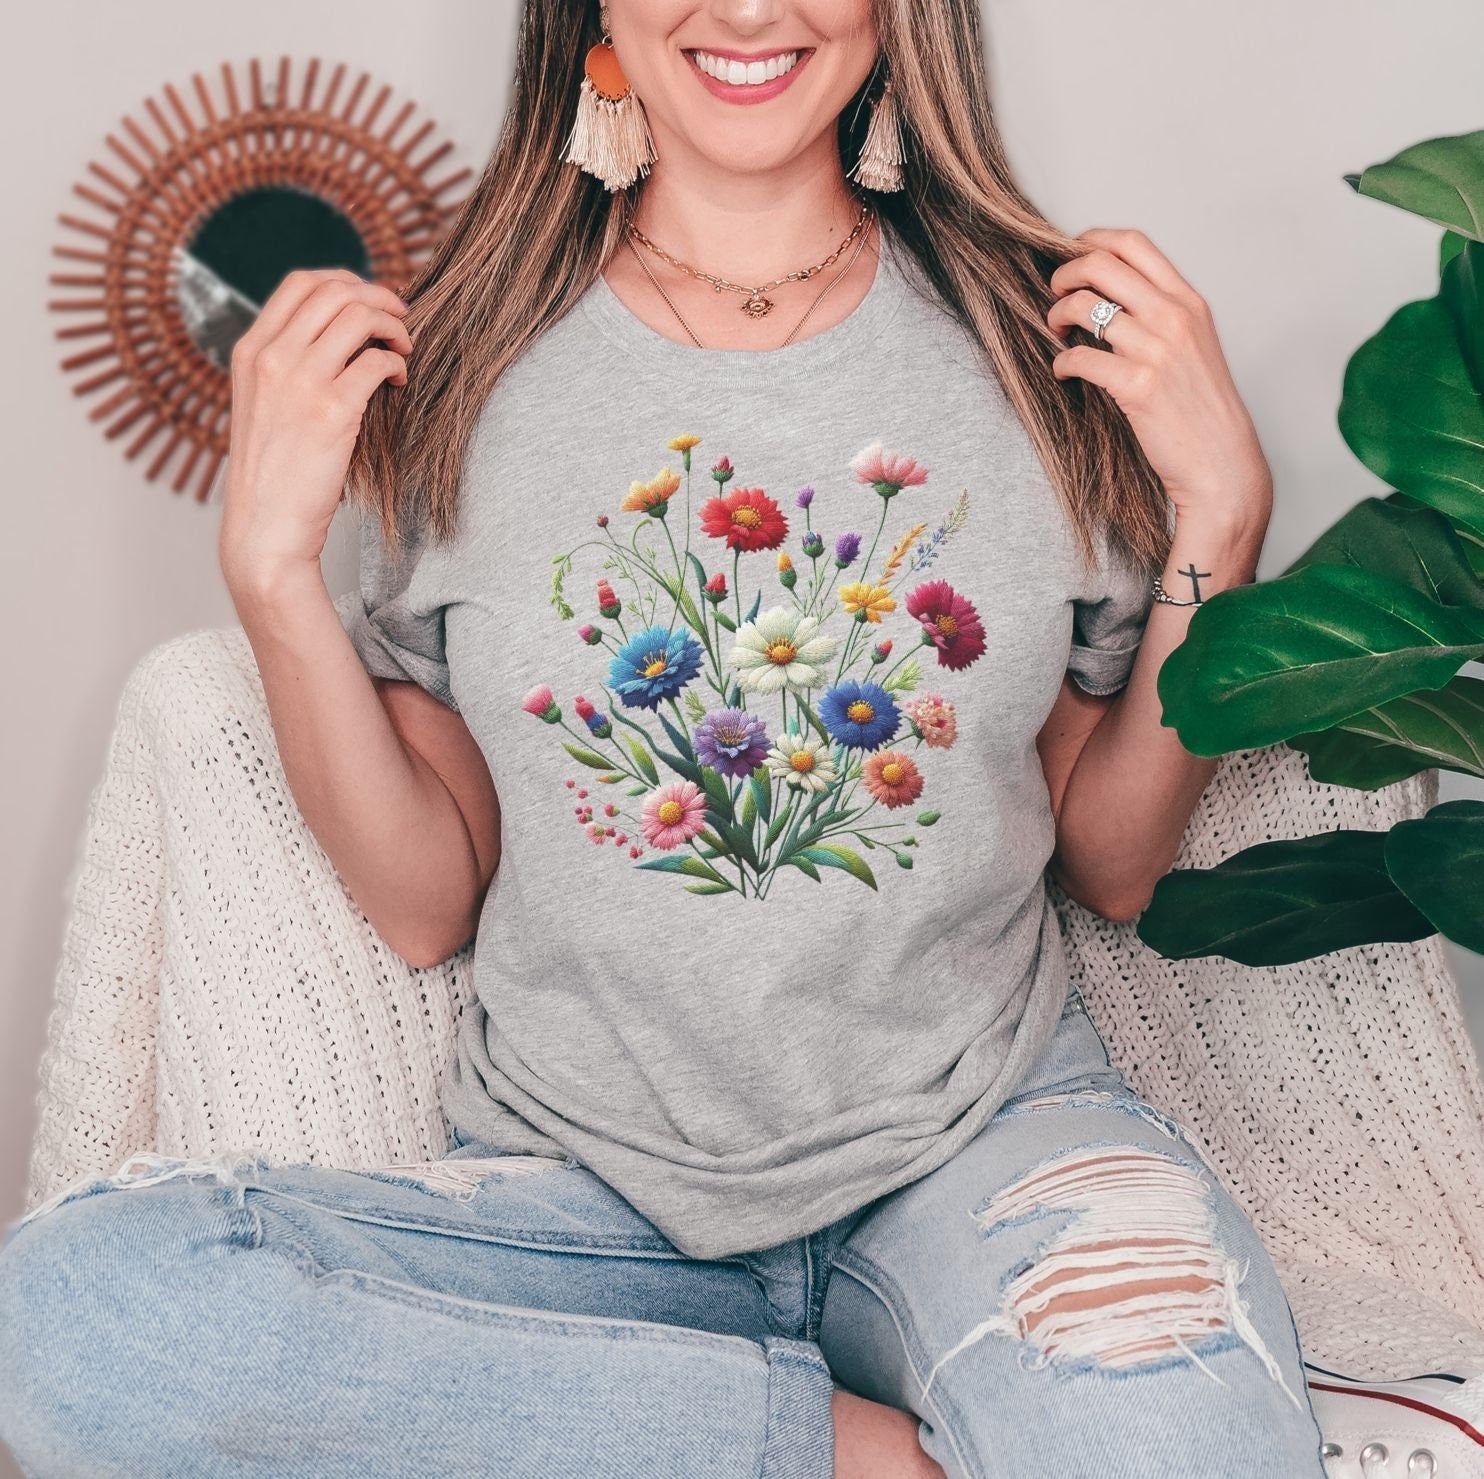 Wildflower Shirt, Flowers shirt, floral botanical plant, gift for mom, girlfriend, nature lover shirt, wild flowers tee, mothers day present - SBS T Shop